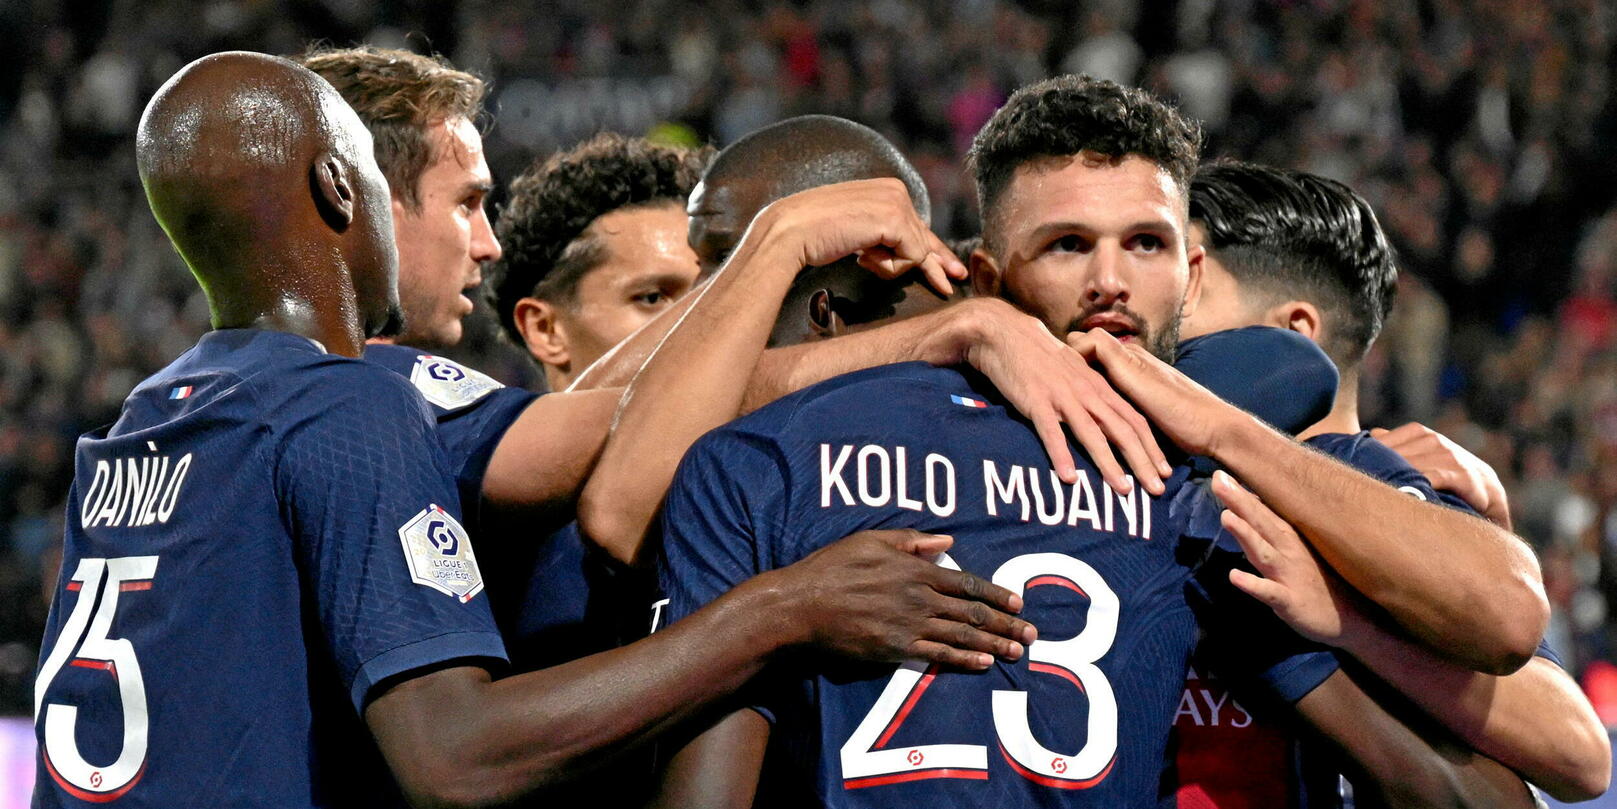 PSG inflicts a heavy defeat on OM